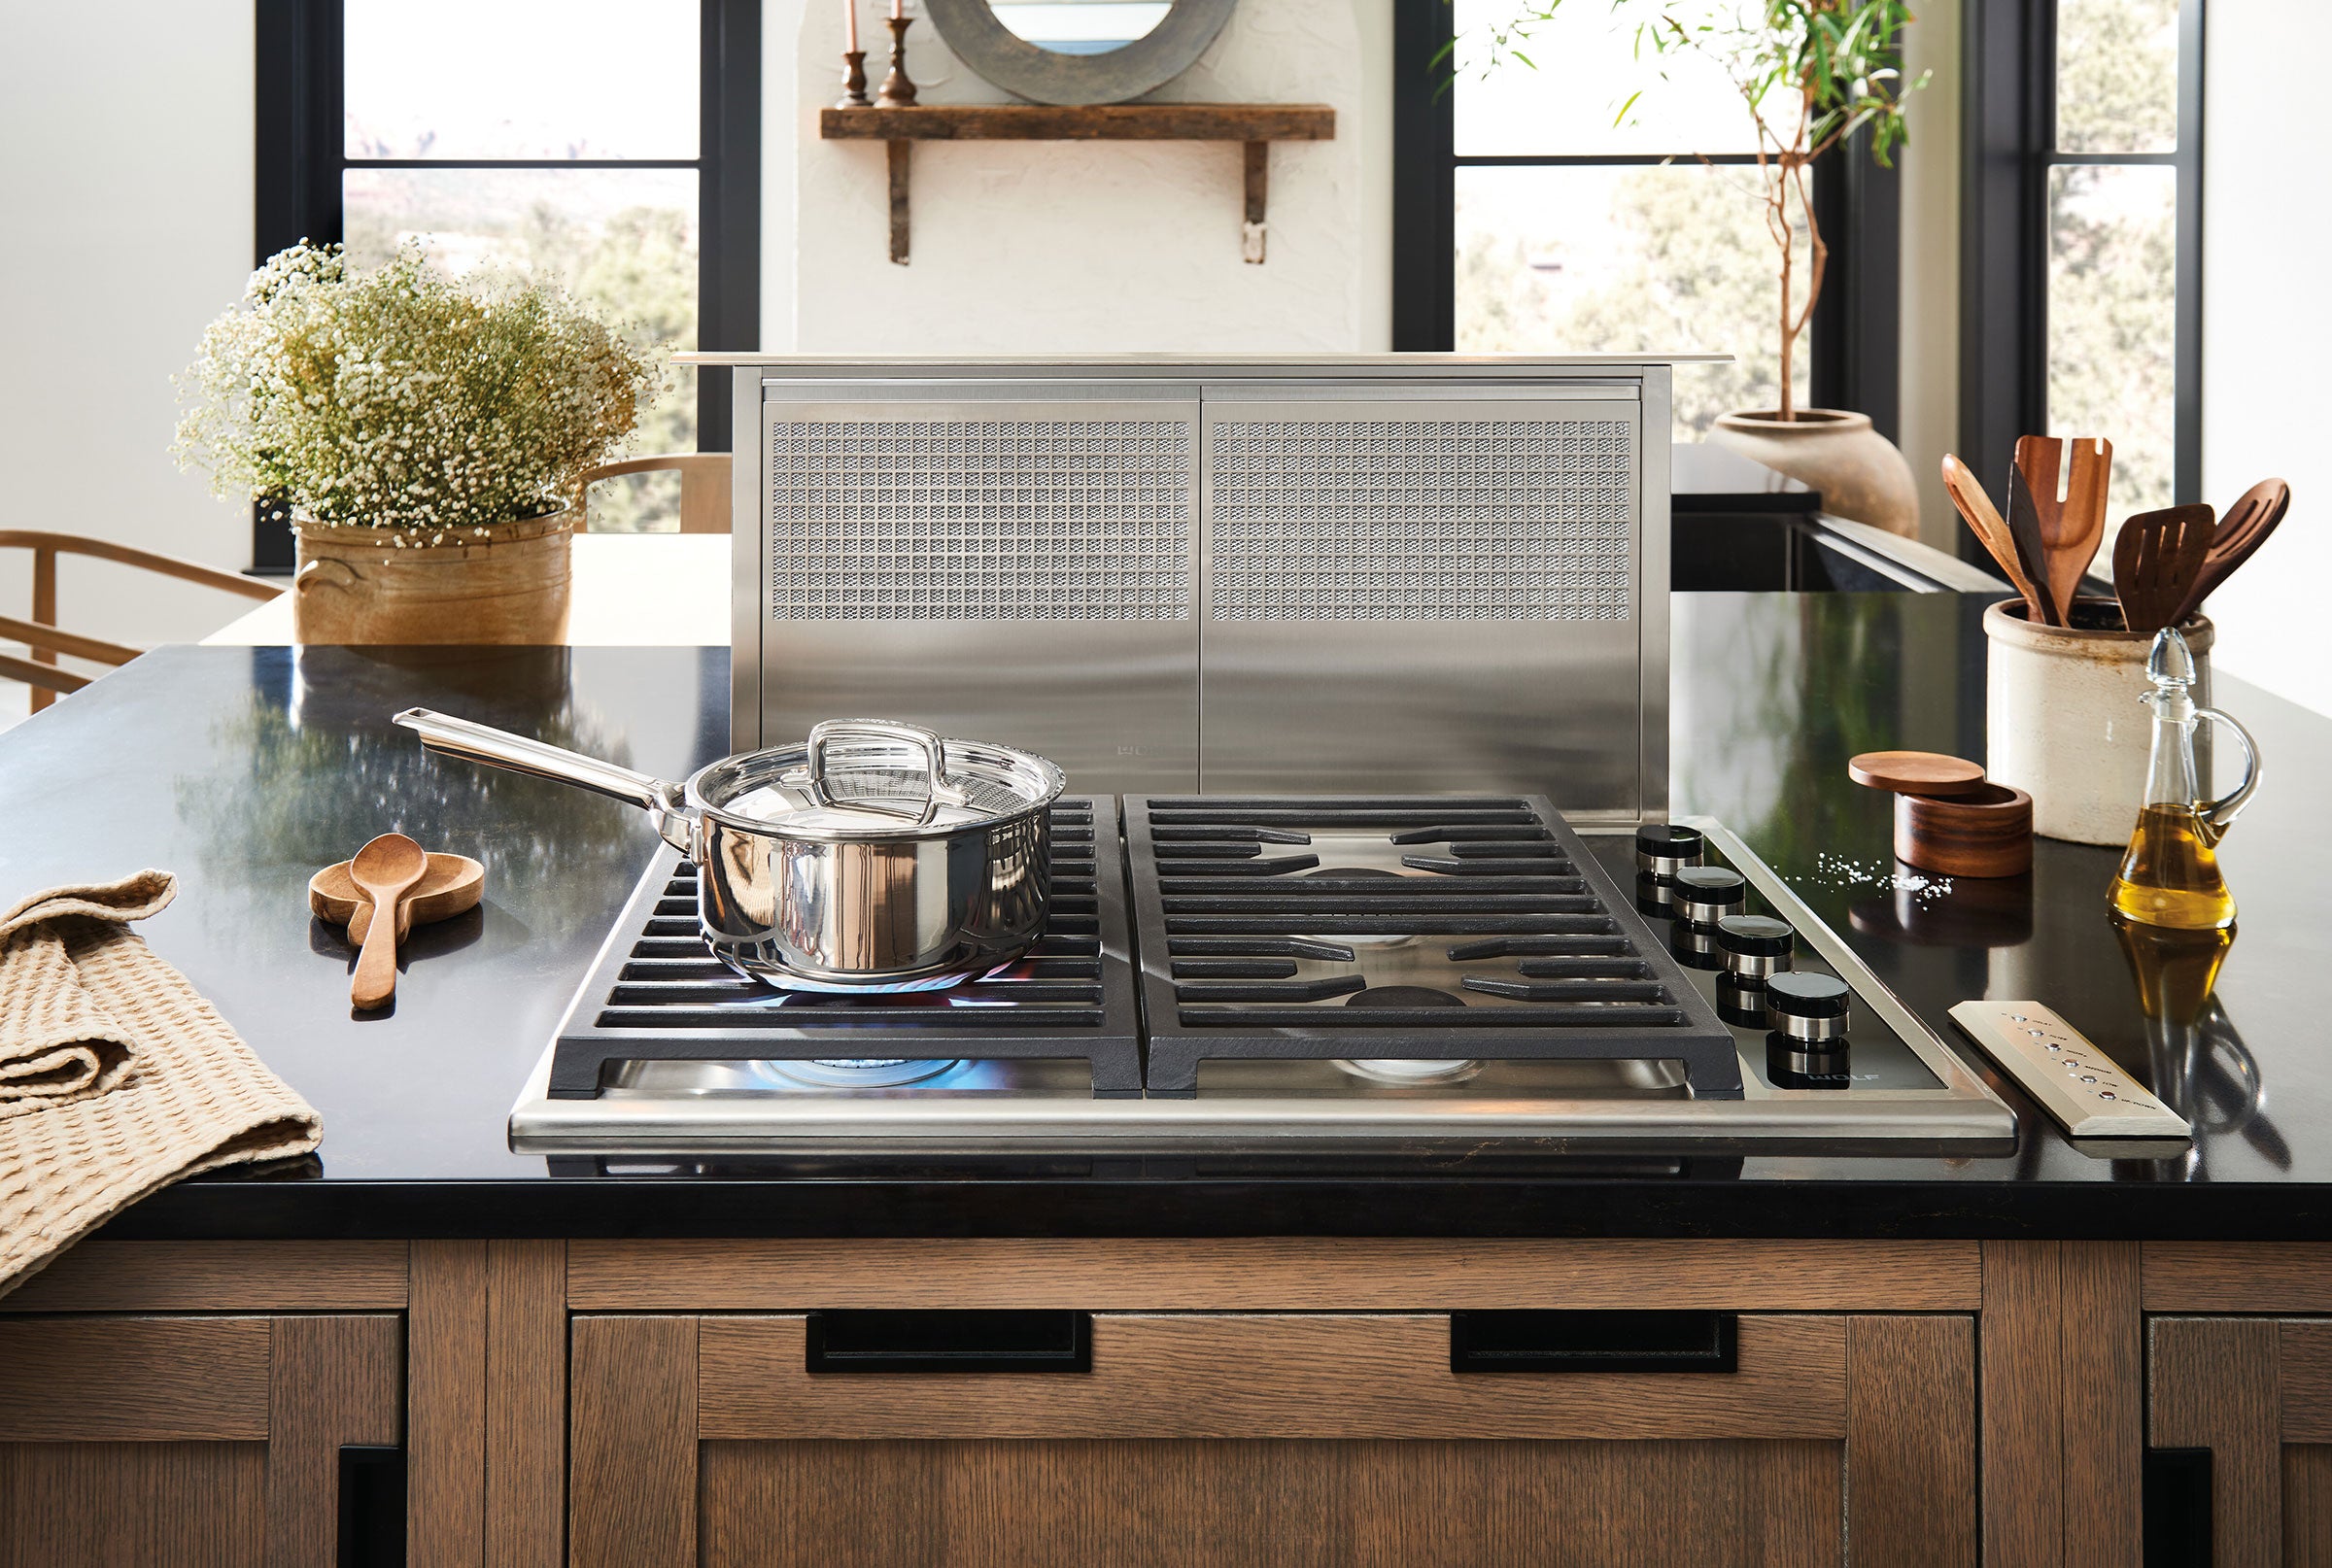 Gas cooktop by Wolf available at Expressions Home Gallery / Reece Bath & Kitchen